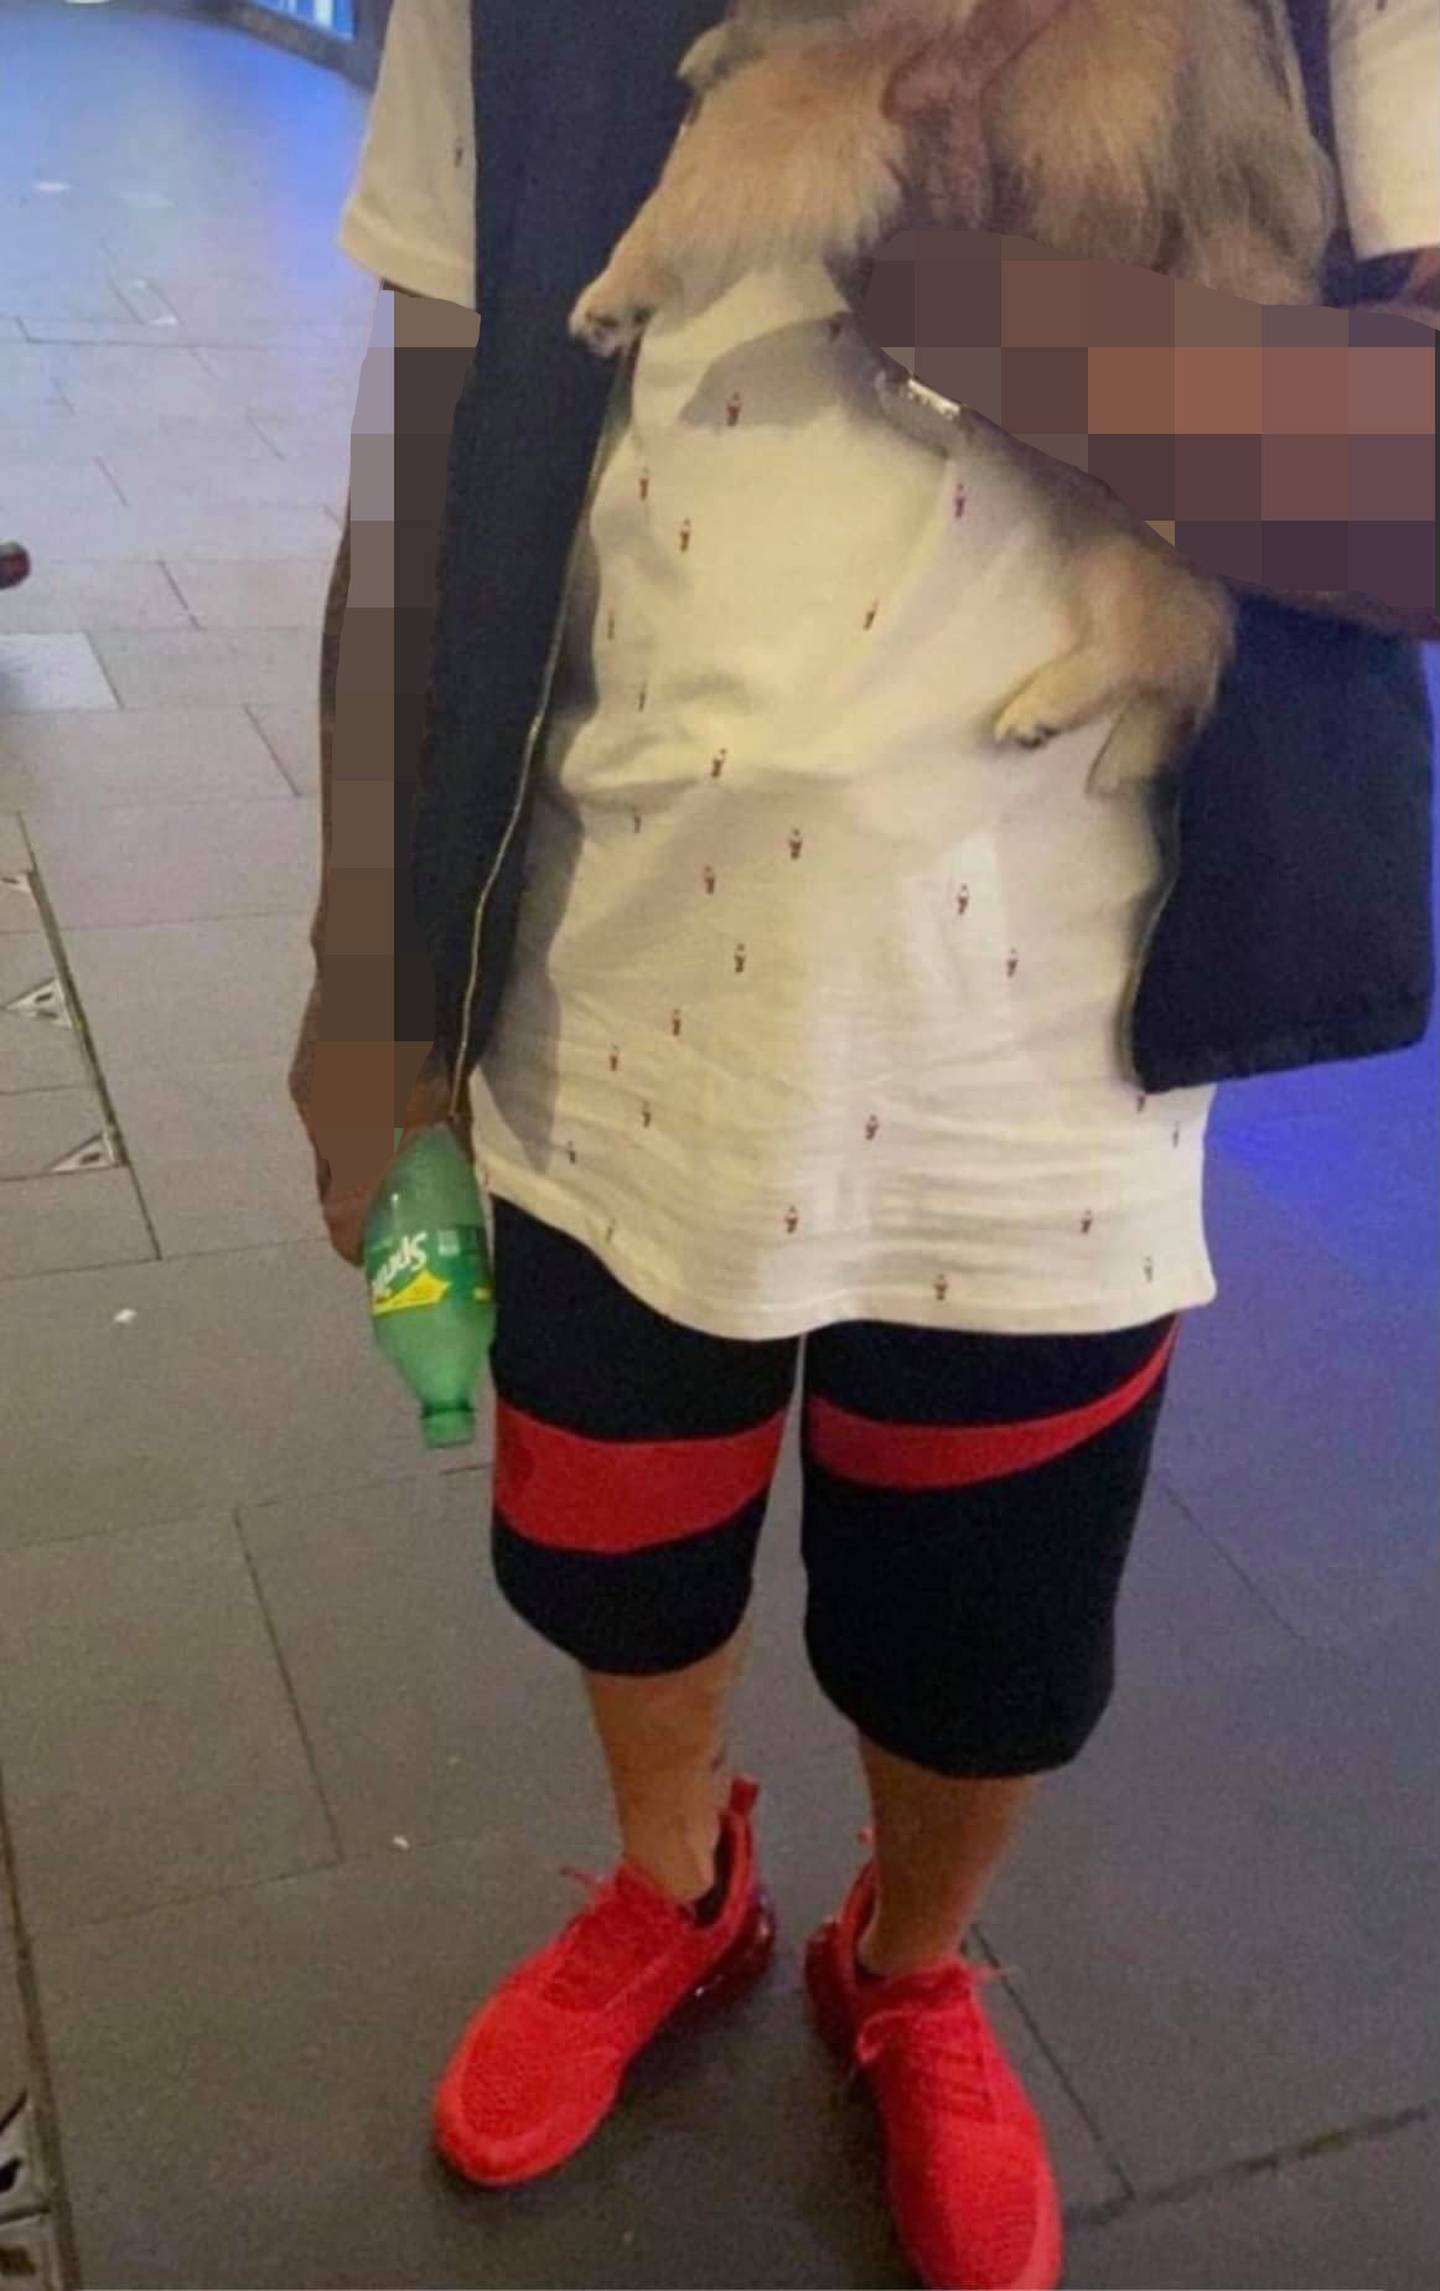 A woman contacted Monique Higgins claiming to have seen Bill early Sunday morning on Queen St....